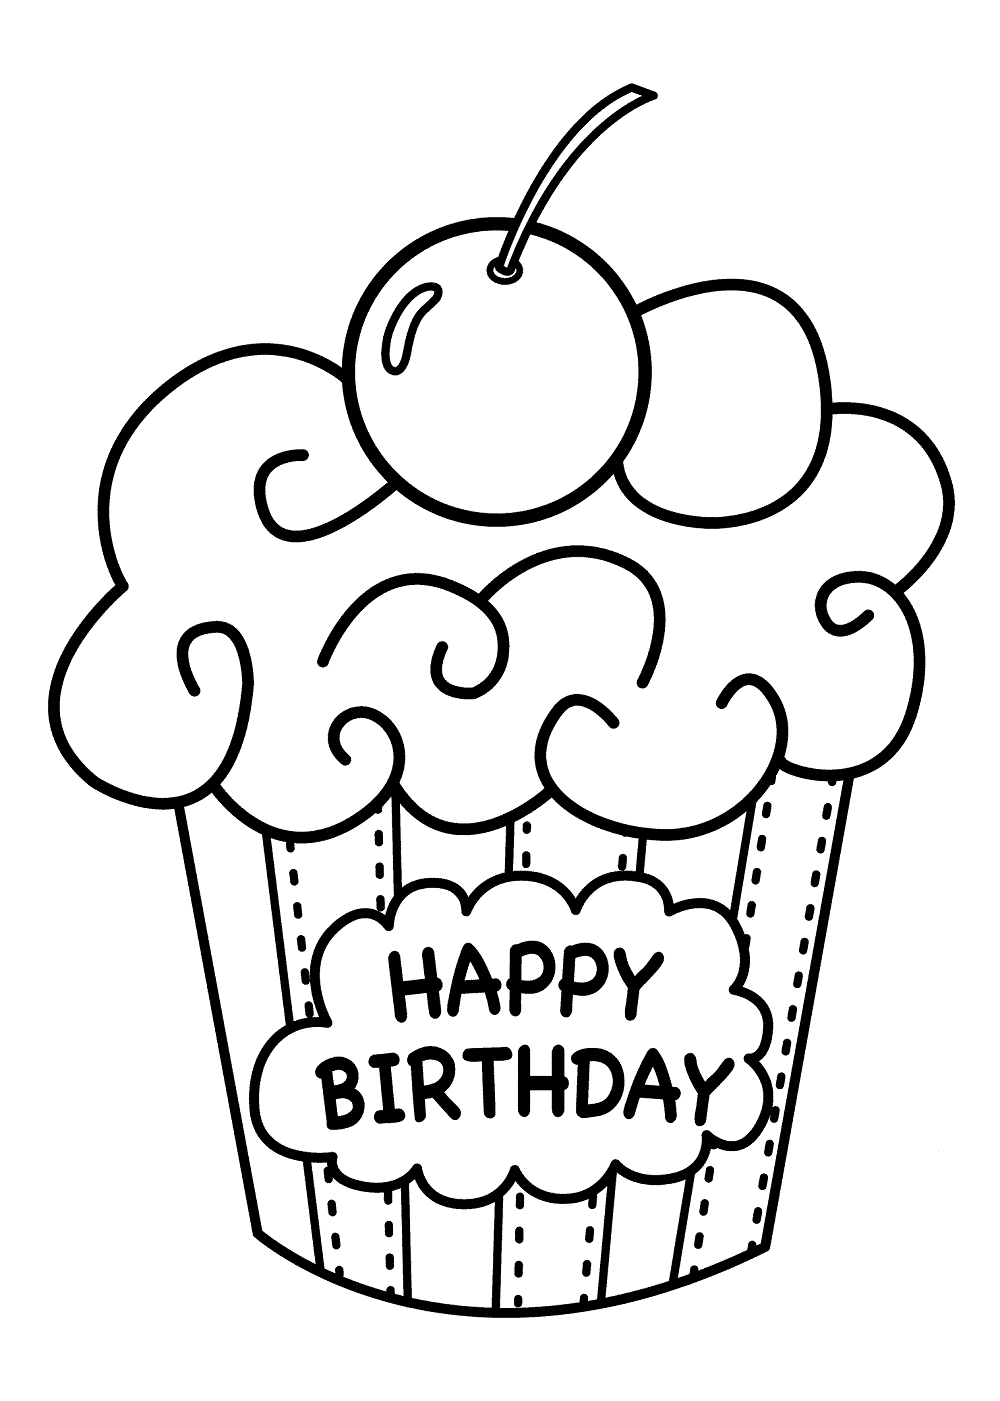 Download 25 Free Printable Happy Birthday Coloring Pages